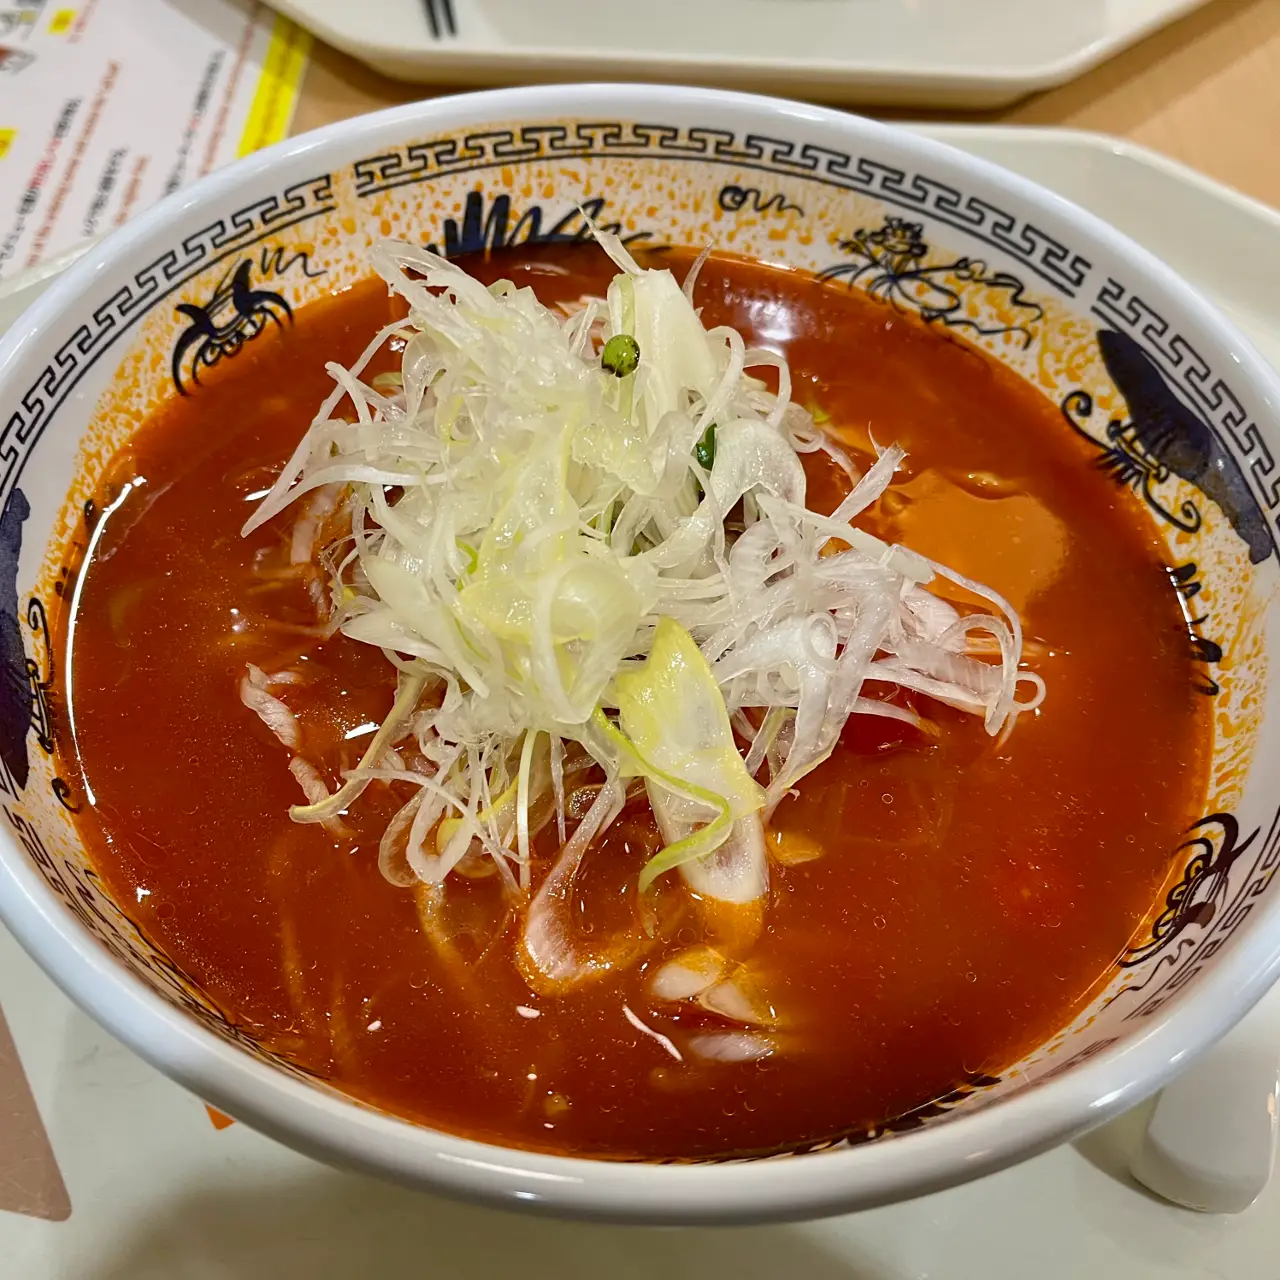 Don’t really rate the Tomato Tan Tan ramen at Bras…